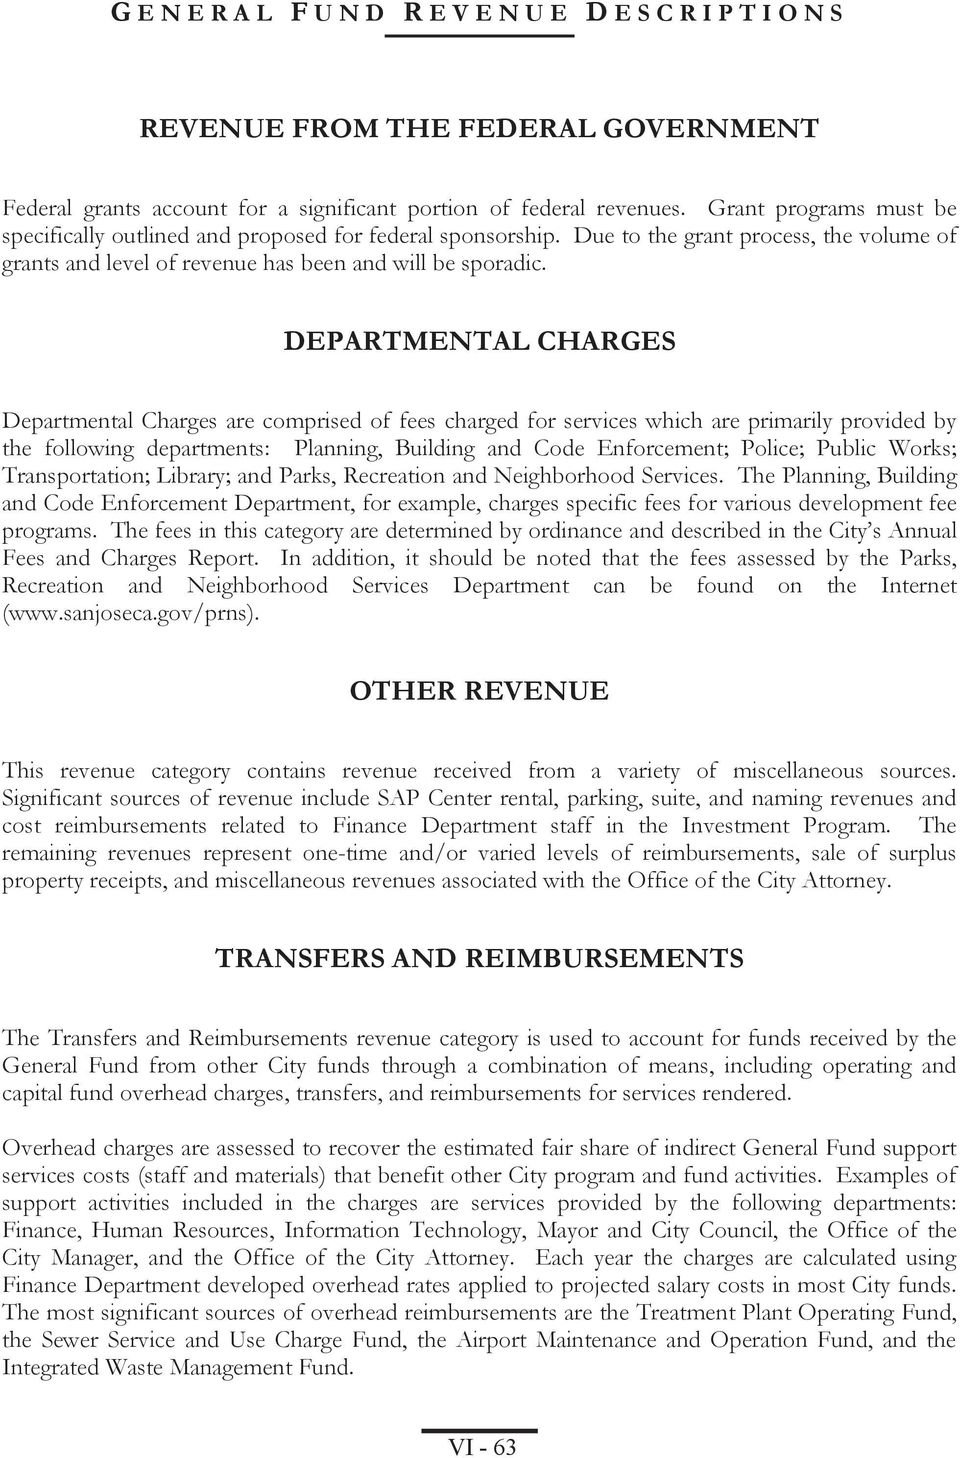 DEPARTMENTAL CHARGES Departmental Charges are comprised of fees charged for services which are primarily provided by the following departments: Planning, Building and Code Enforcement; Police; Public